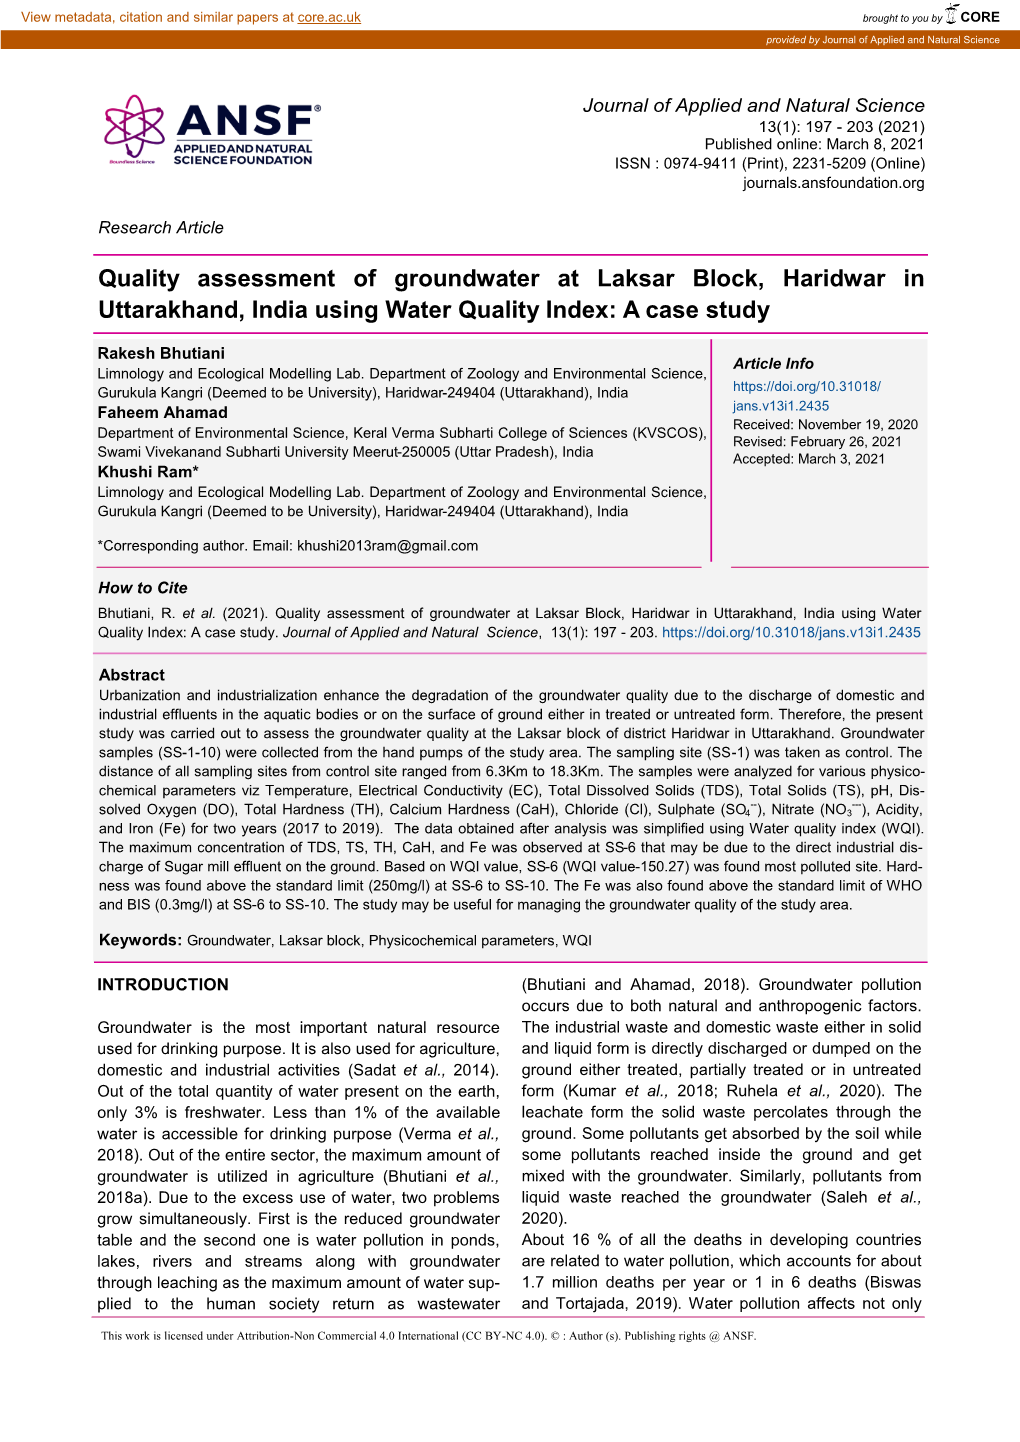 Quality Assessment of Groundwater at Laksar Block, Haridwar in Uttarakhand, India Using Water Quality Index: a Case Study